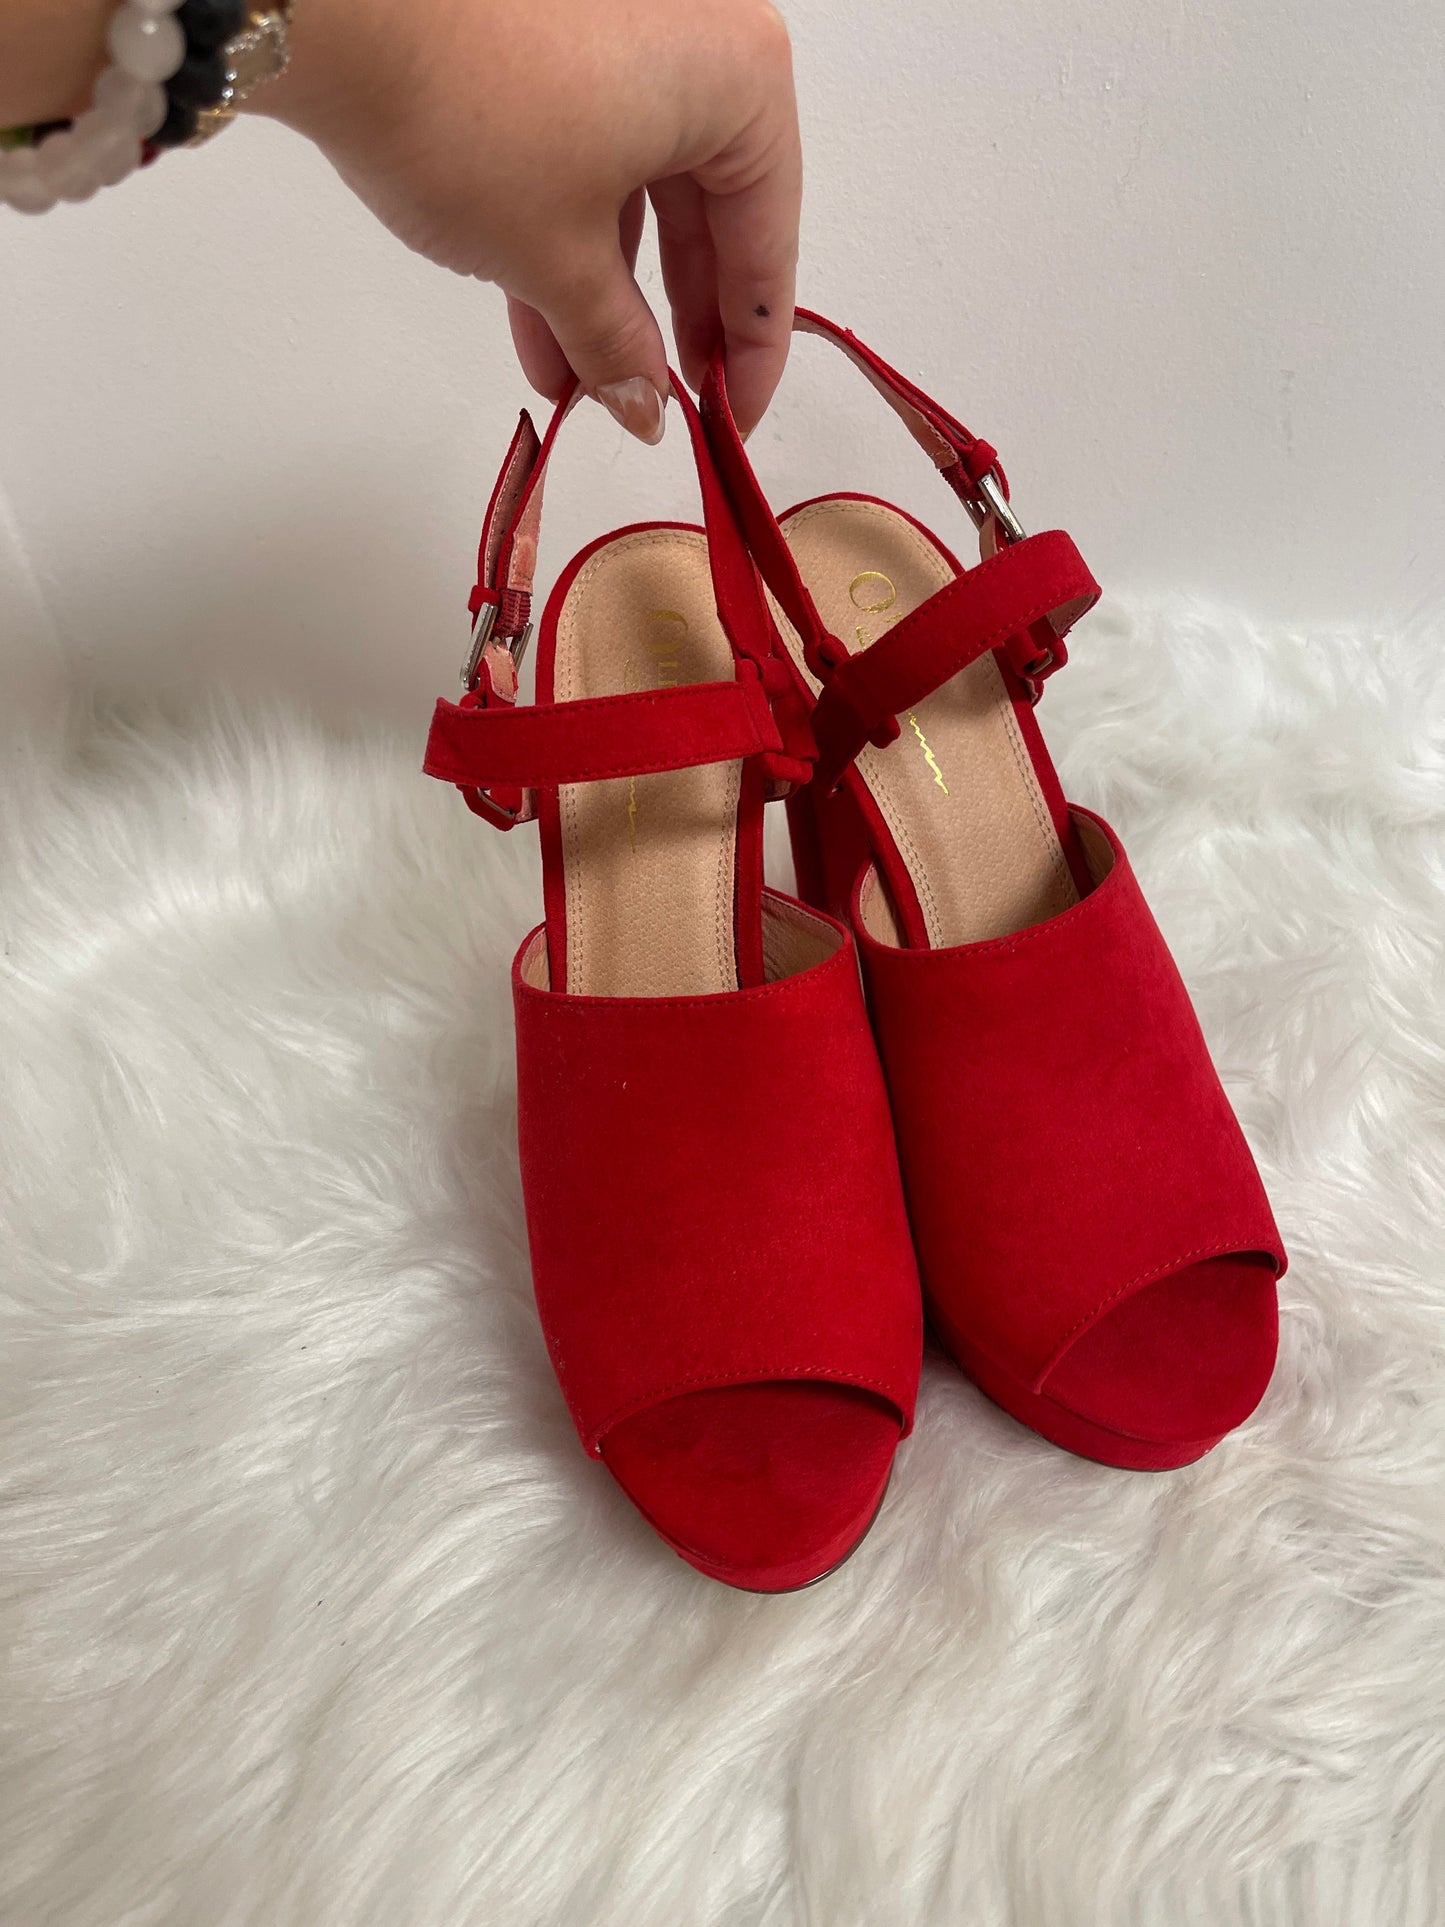 Red Sandals Heels Block Clothes Mentor, Size 9